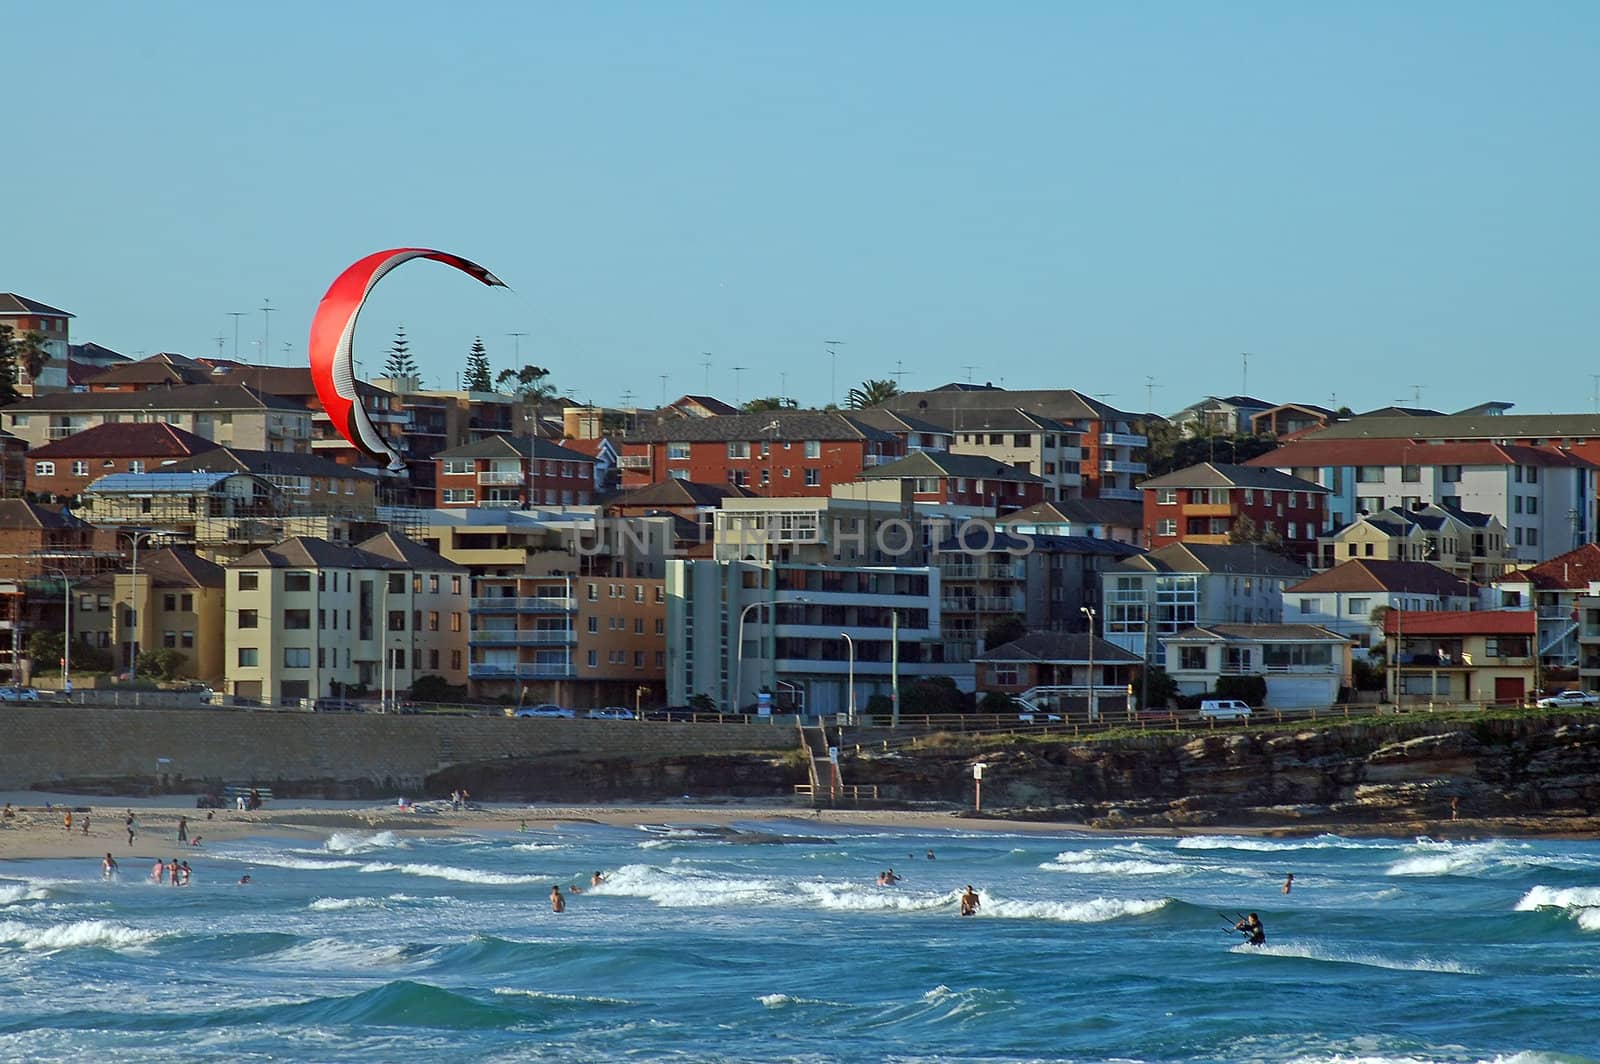 kite surfing and swiming on Maroubra beach in Sydney